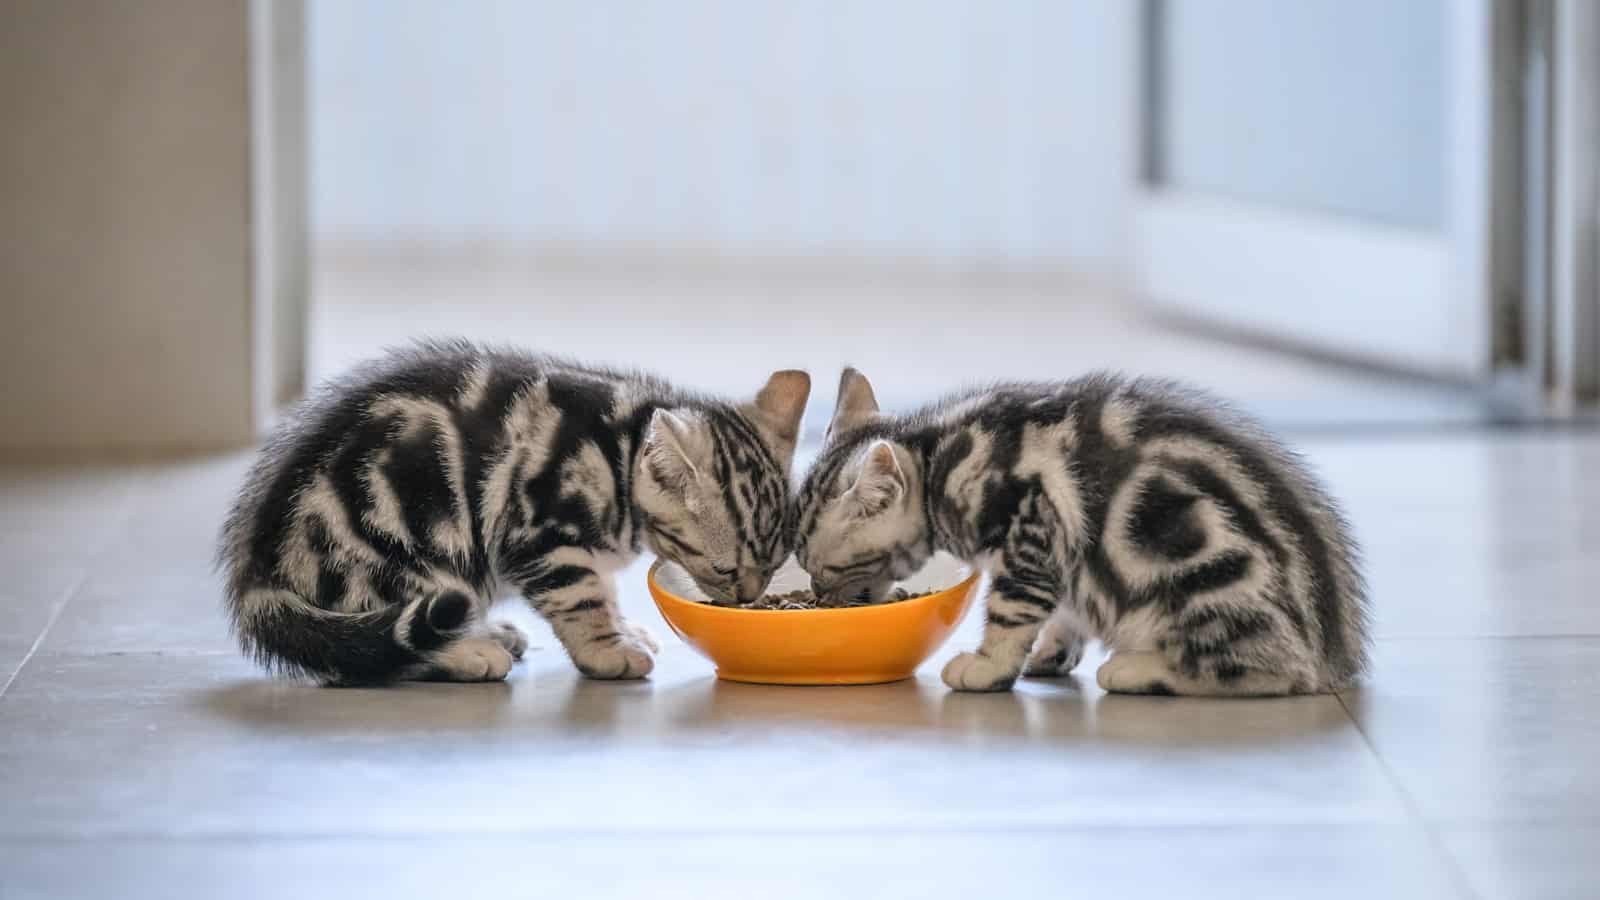 Two hungry American cat kittens eating